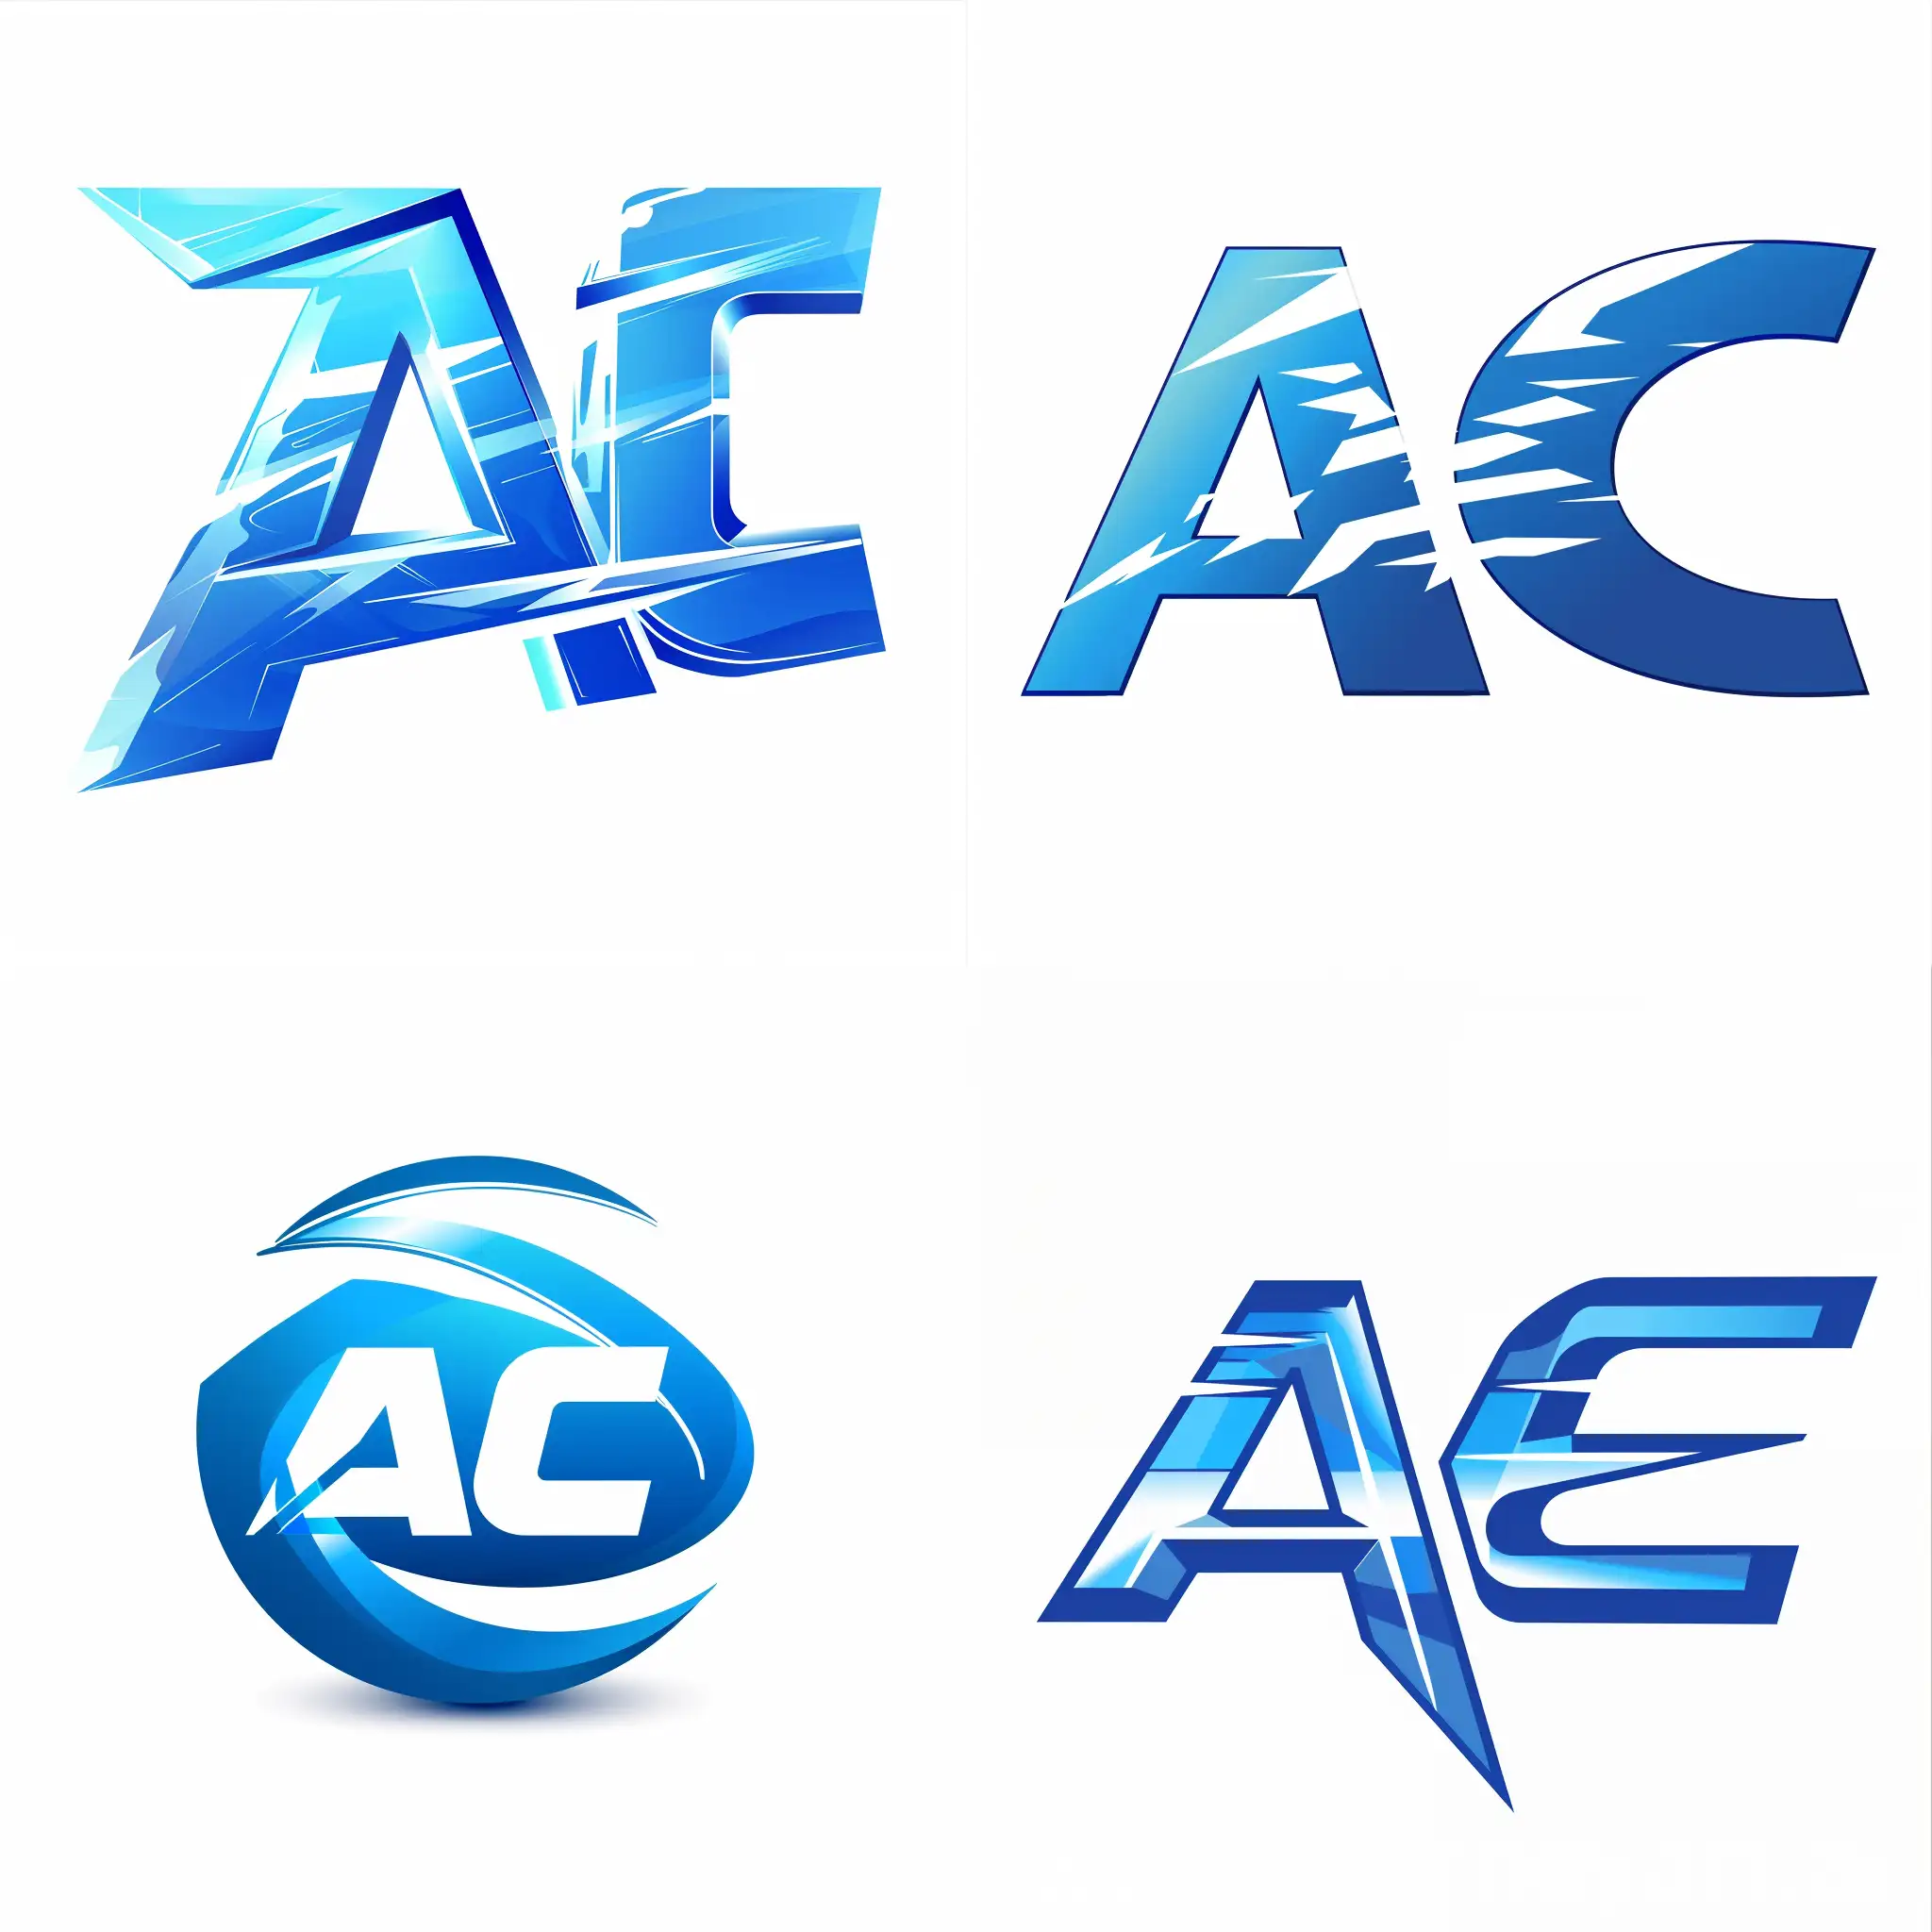 a 640x640 logo image, blue and white color, letters "ACE", high quality